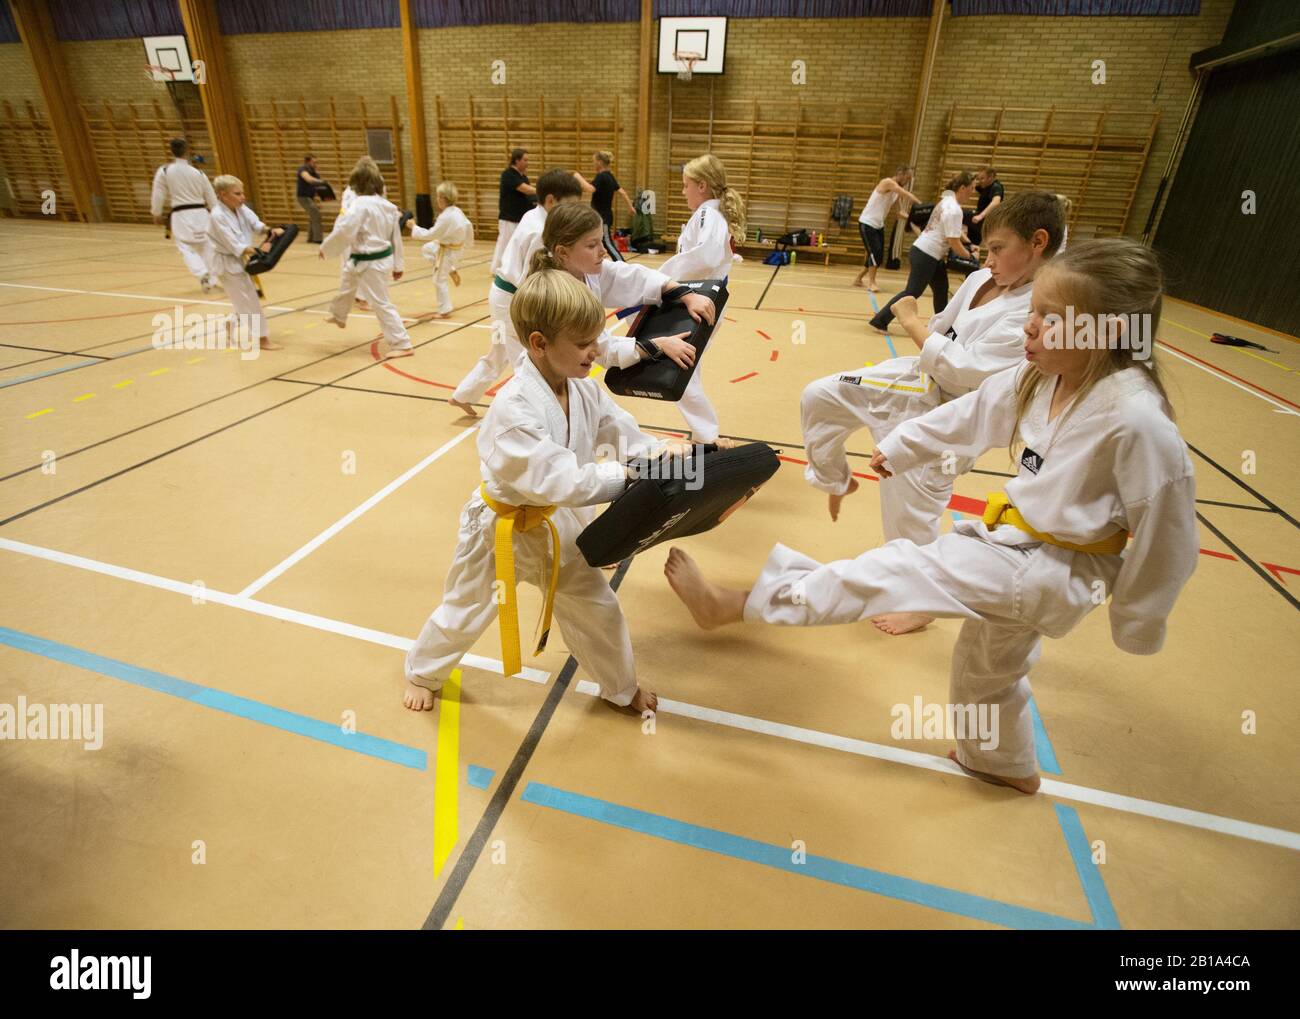 Young people practicing taekwondo. Taekwondo, Tae Kwon Do or Taekwon-Do is a Korean martial art, characterized by its emphasis on head-height kicks, jumping and spinning kicks, and fast kicking techniques.Photo Jeppe Gustafsson Stock Photo